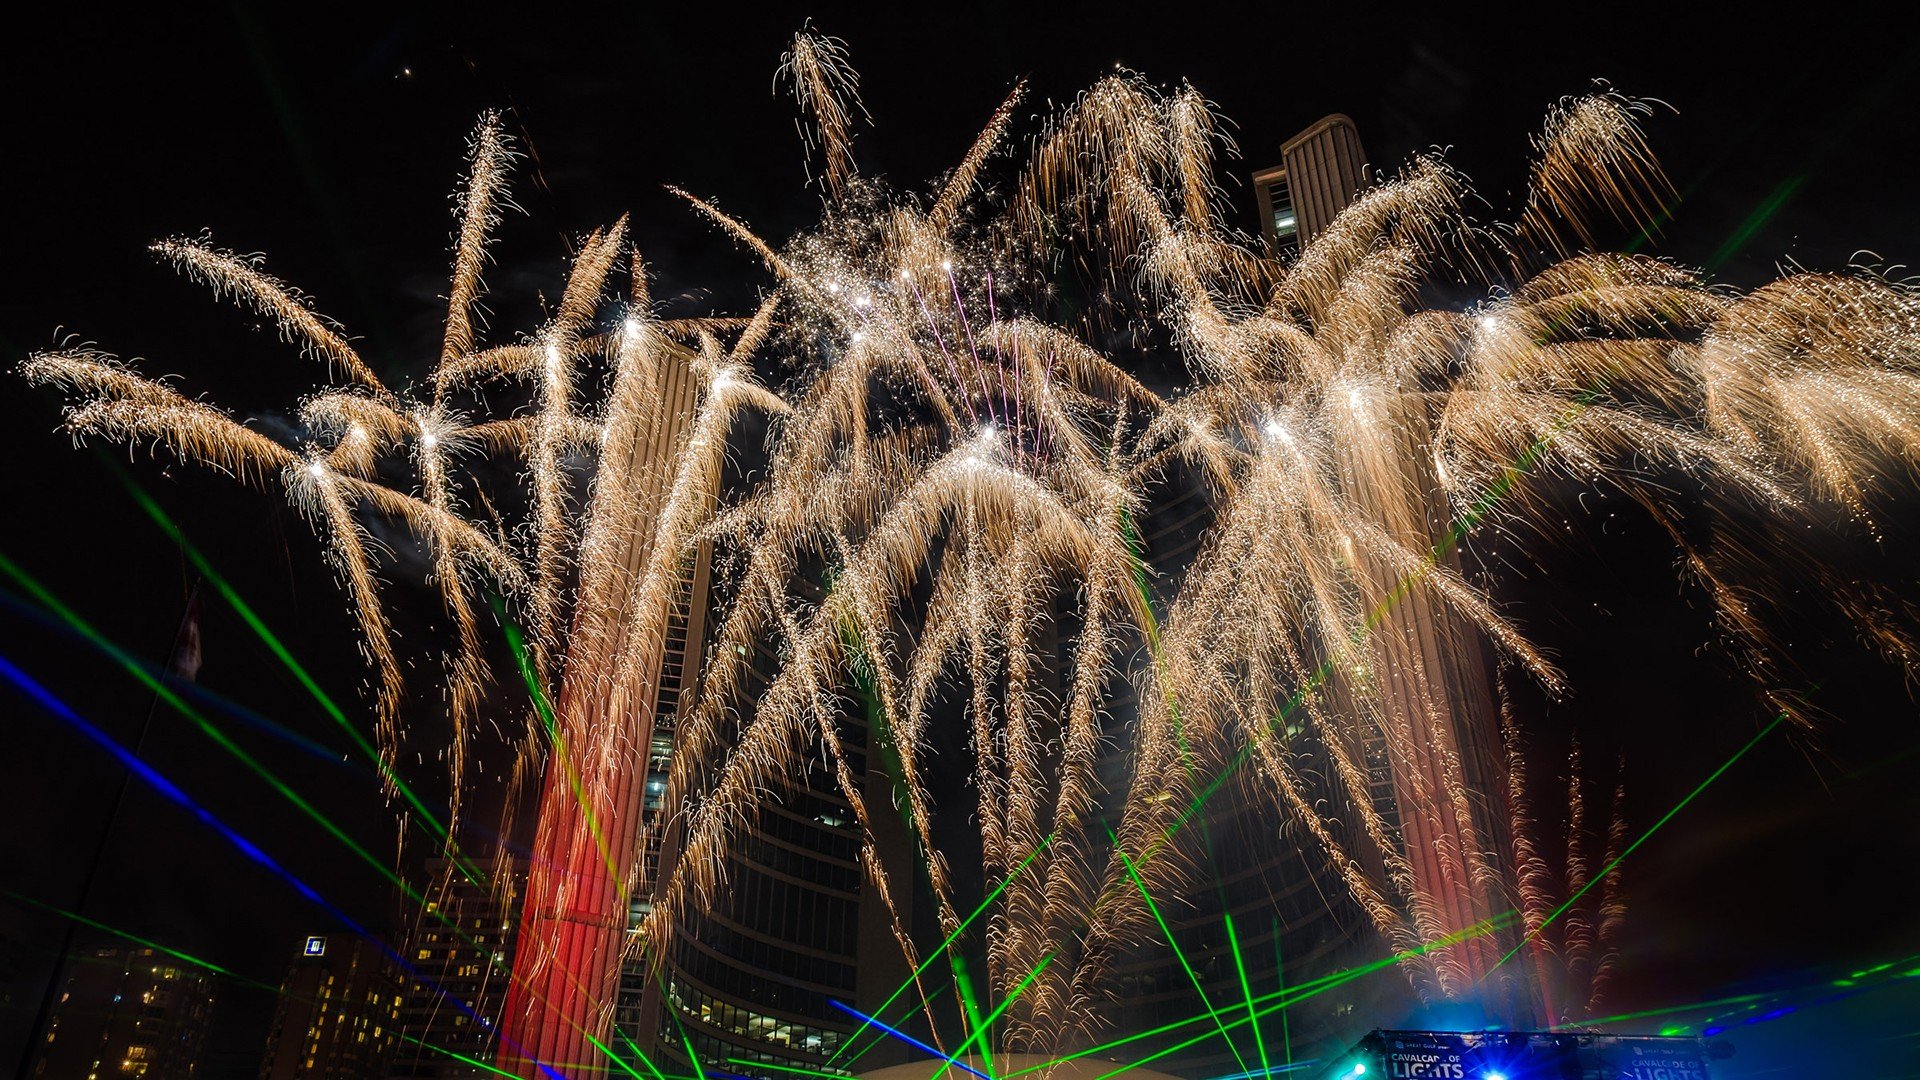 Seven tips to photograph fireworks and architecture